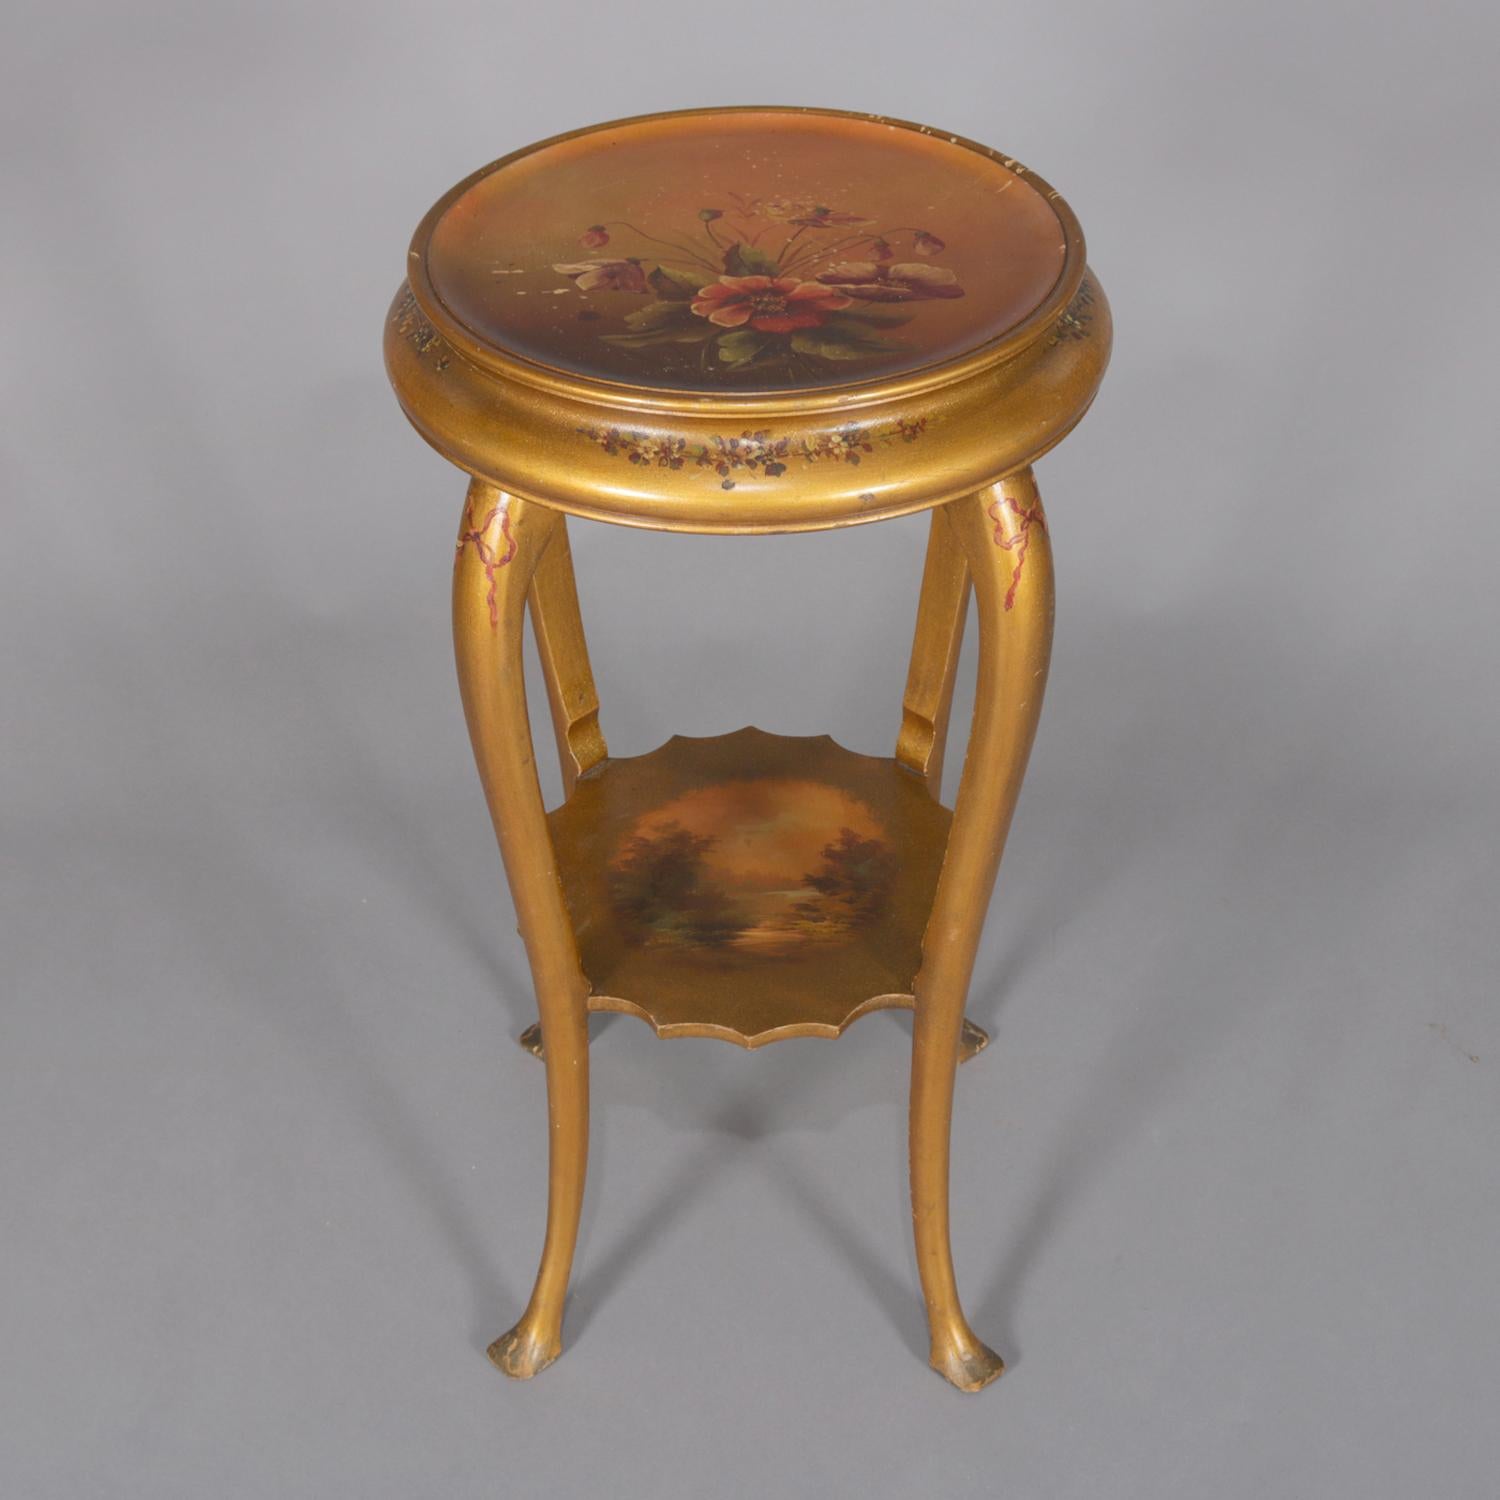 Vernis Martin Hand-Painted Landscape and Floral Giltwood Plant Stand, circa 1900 3